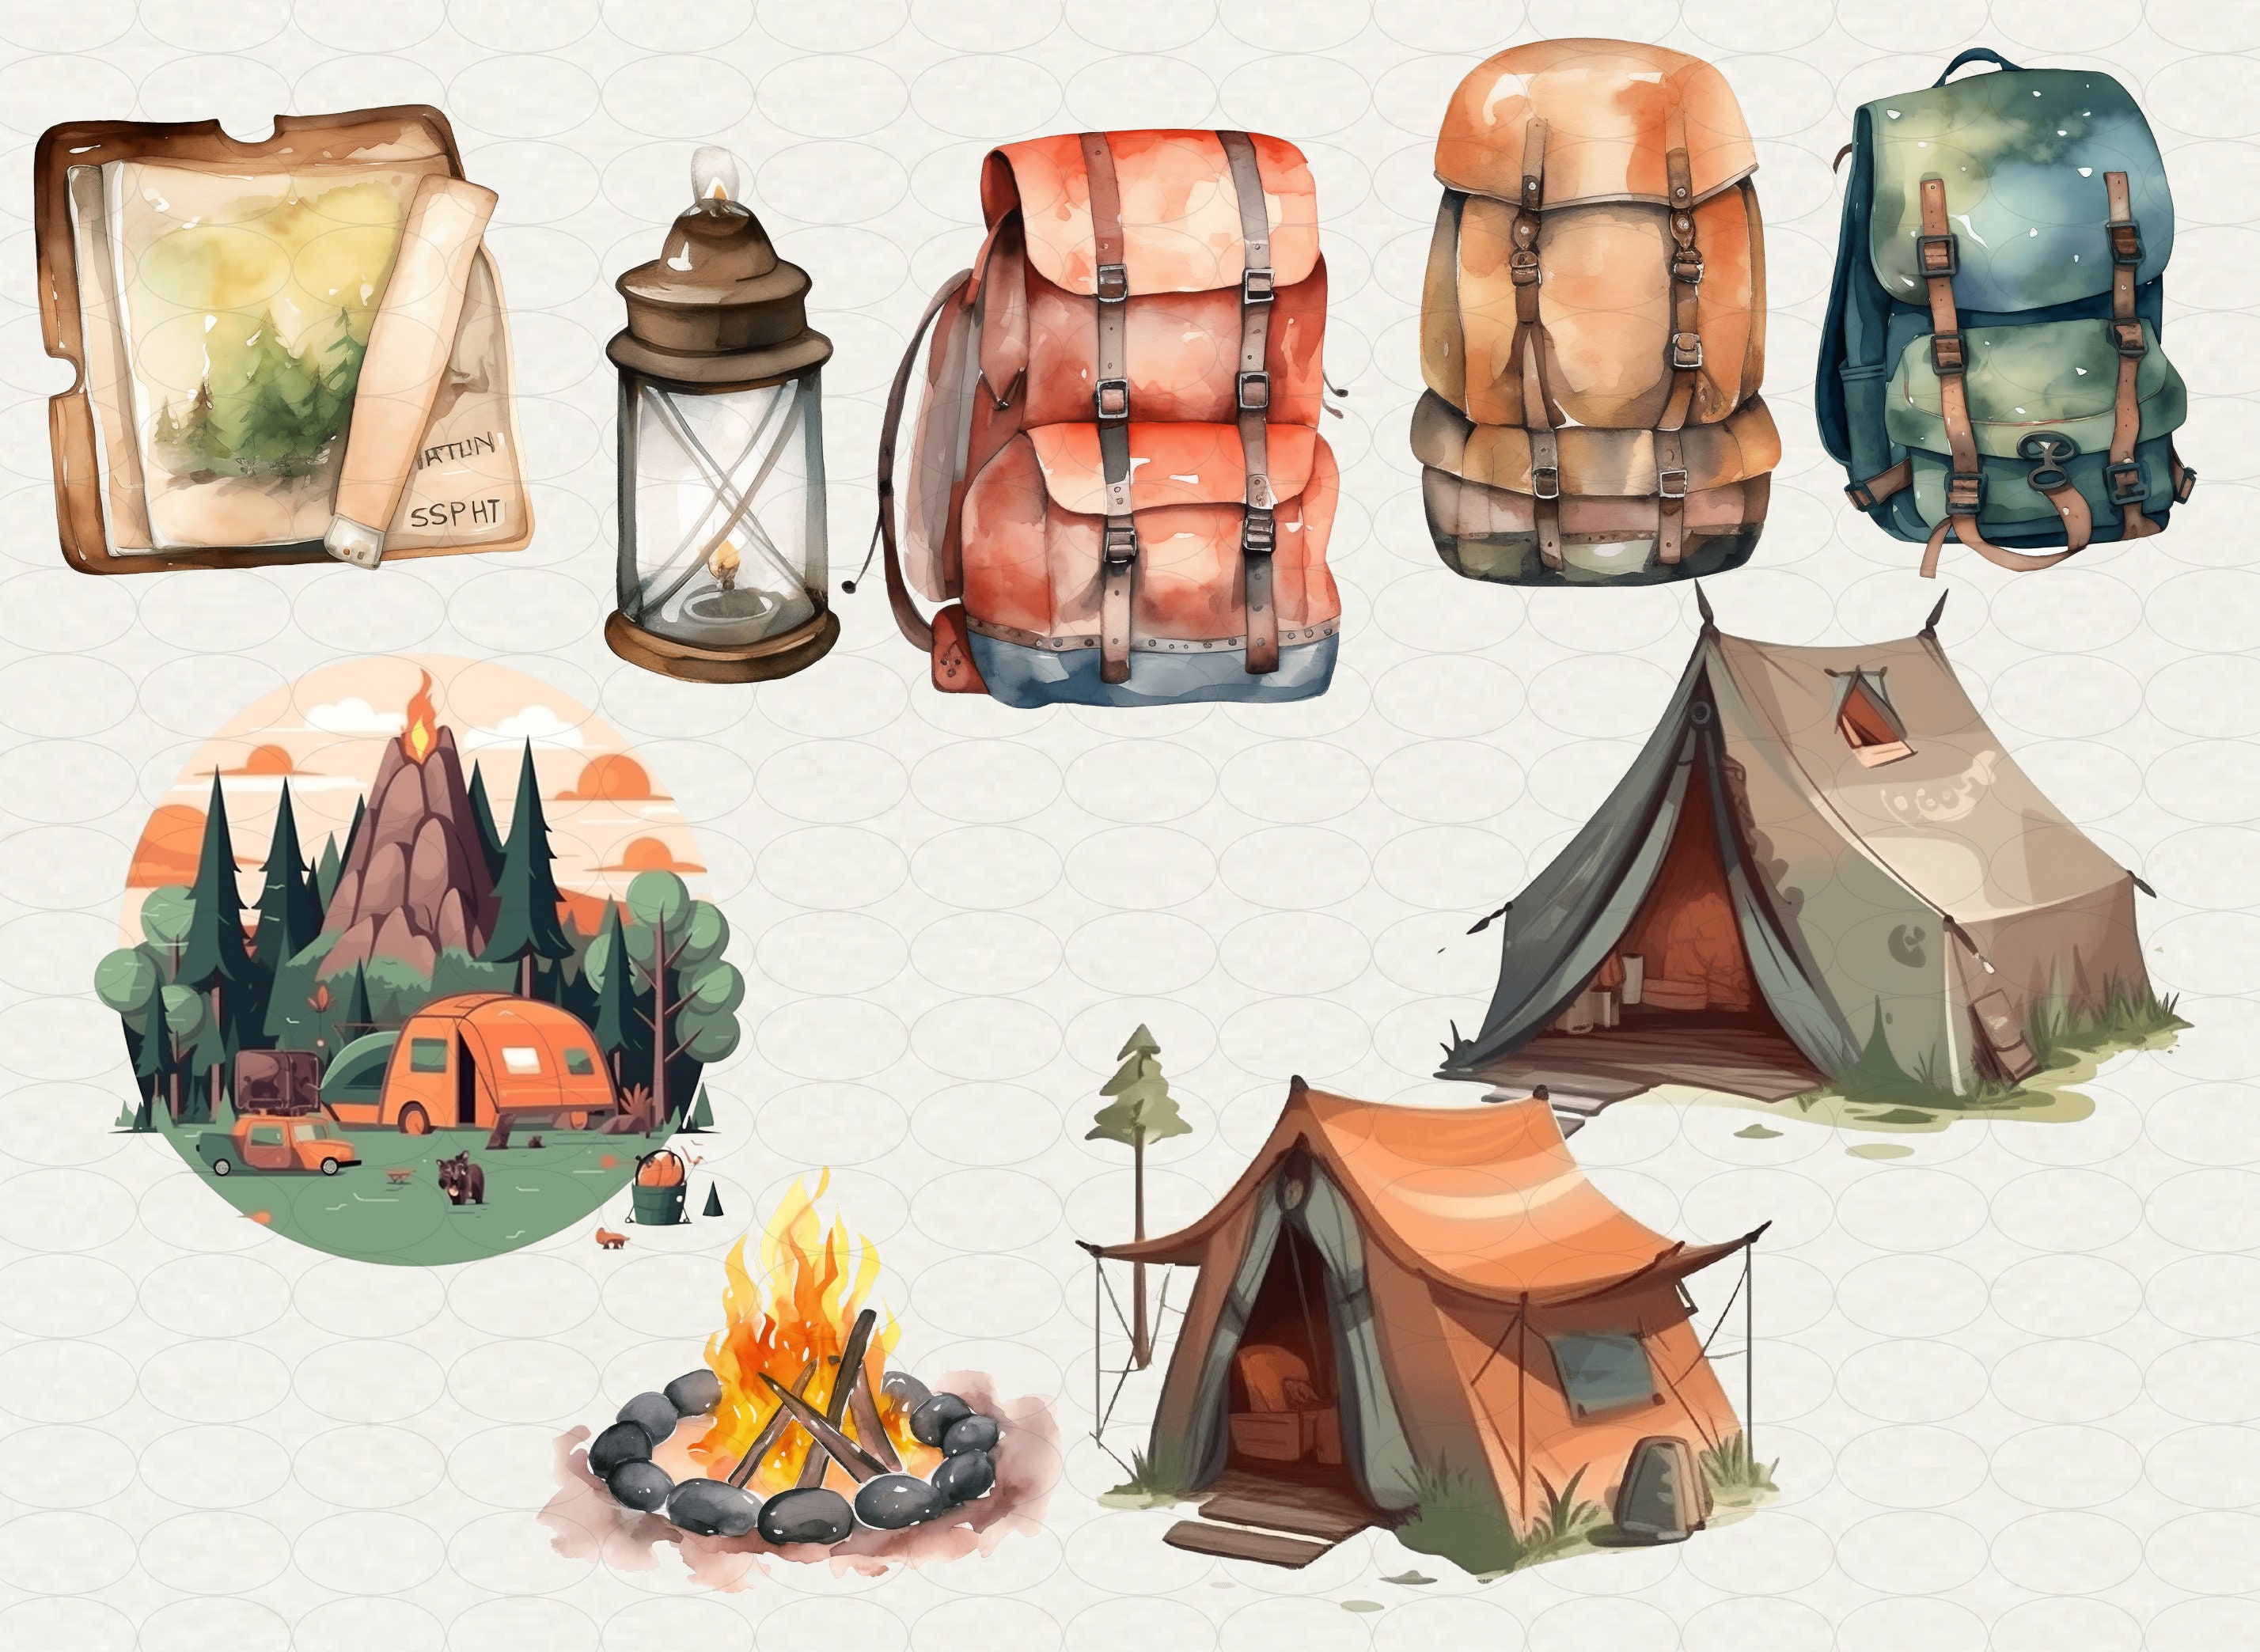 Camping Clipart - Backpacking Clip Art - Hiking - Campfire